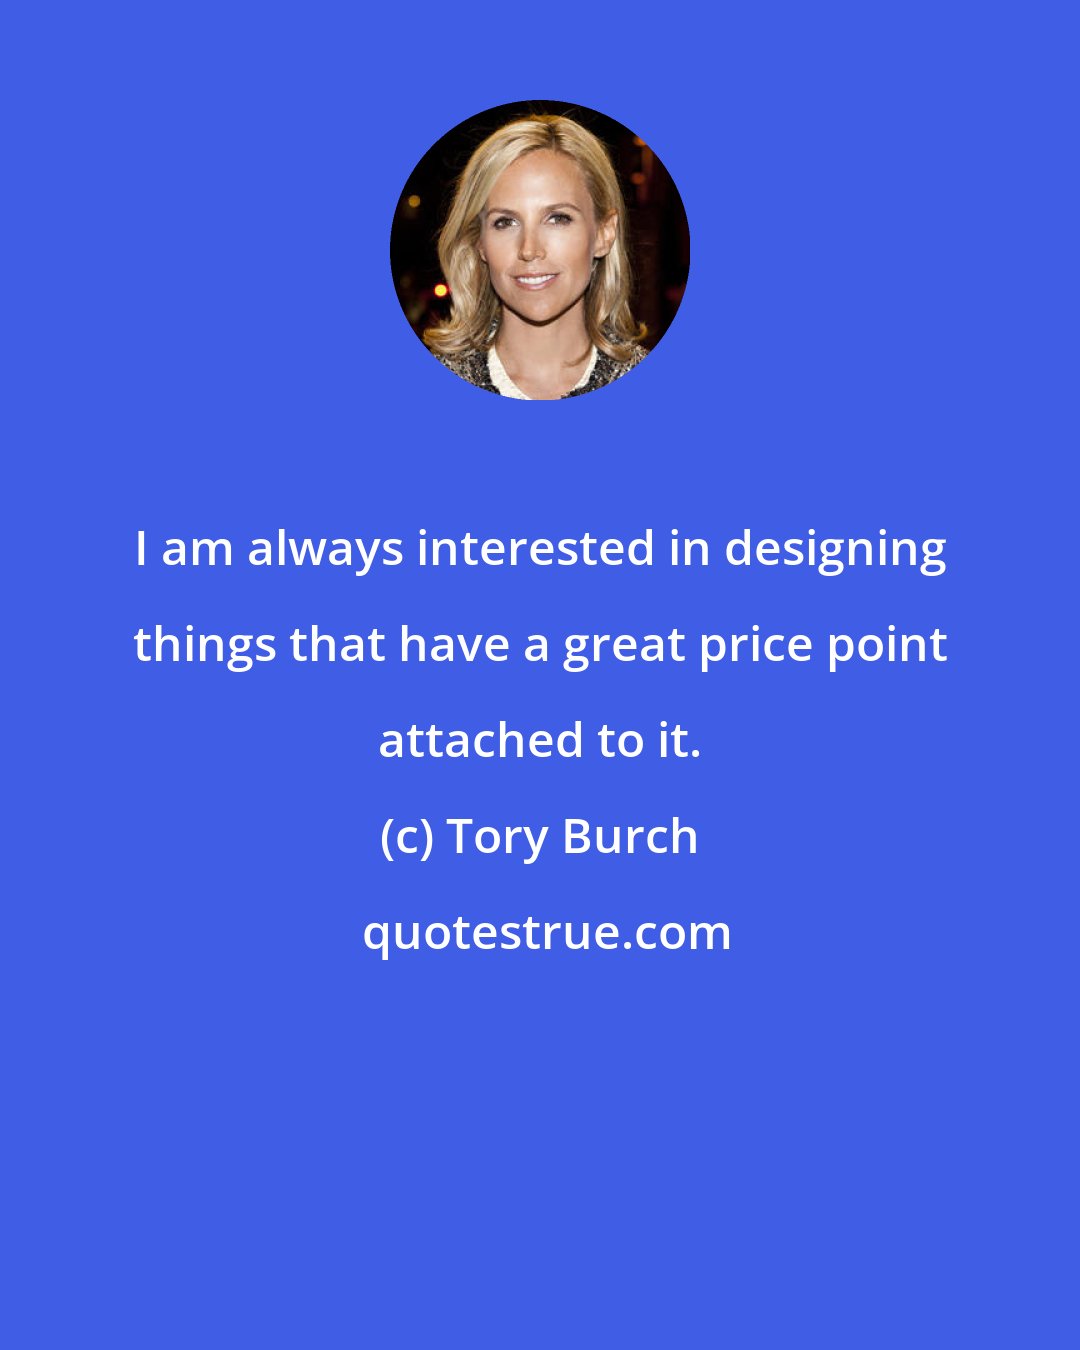 Tory Burch: I am always interested in designing things that have a great price point attached to it.